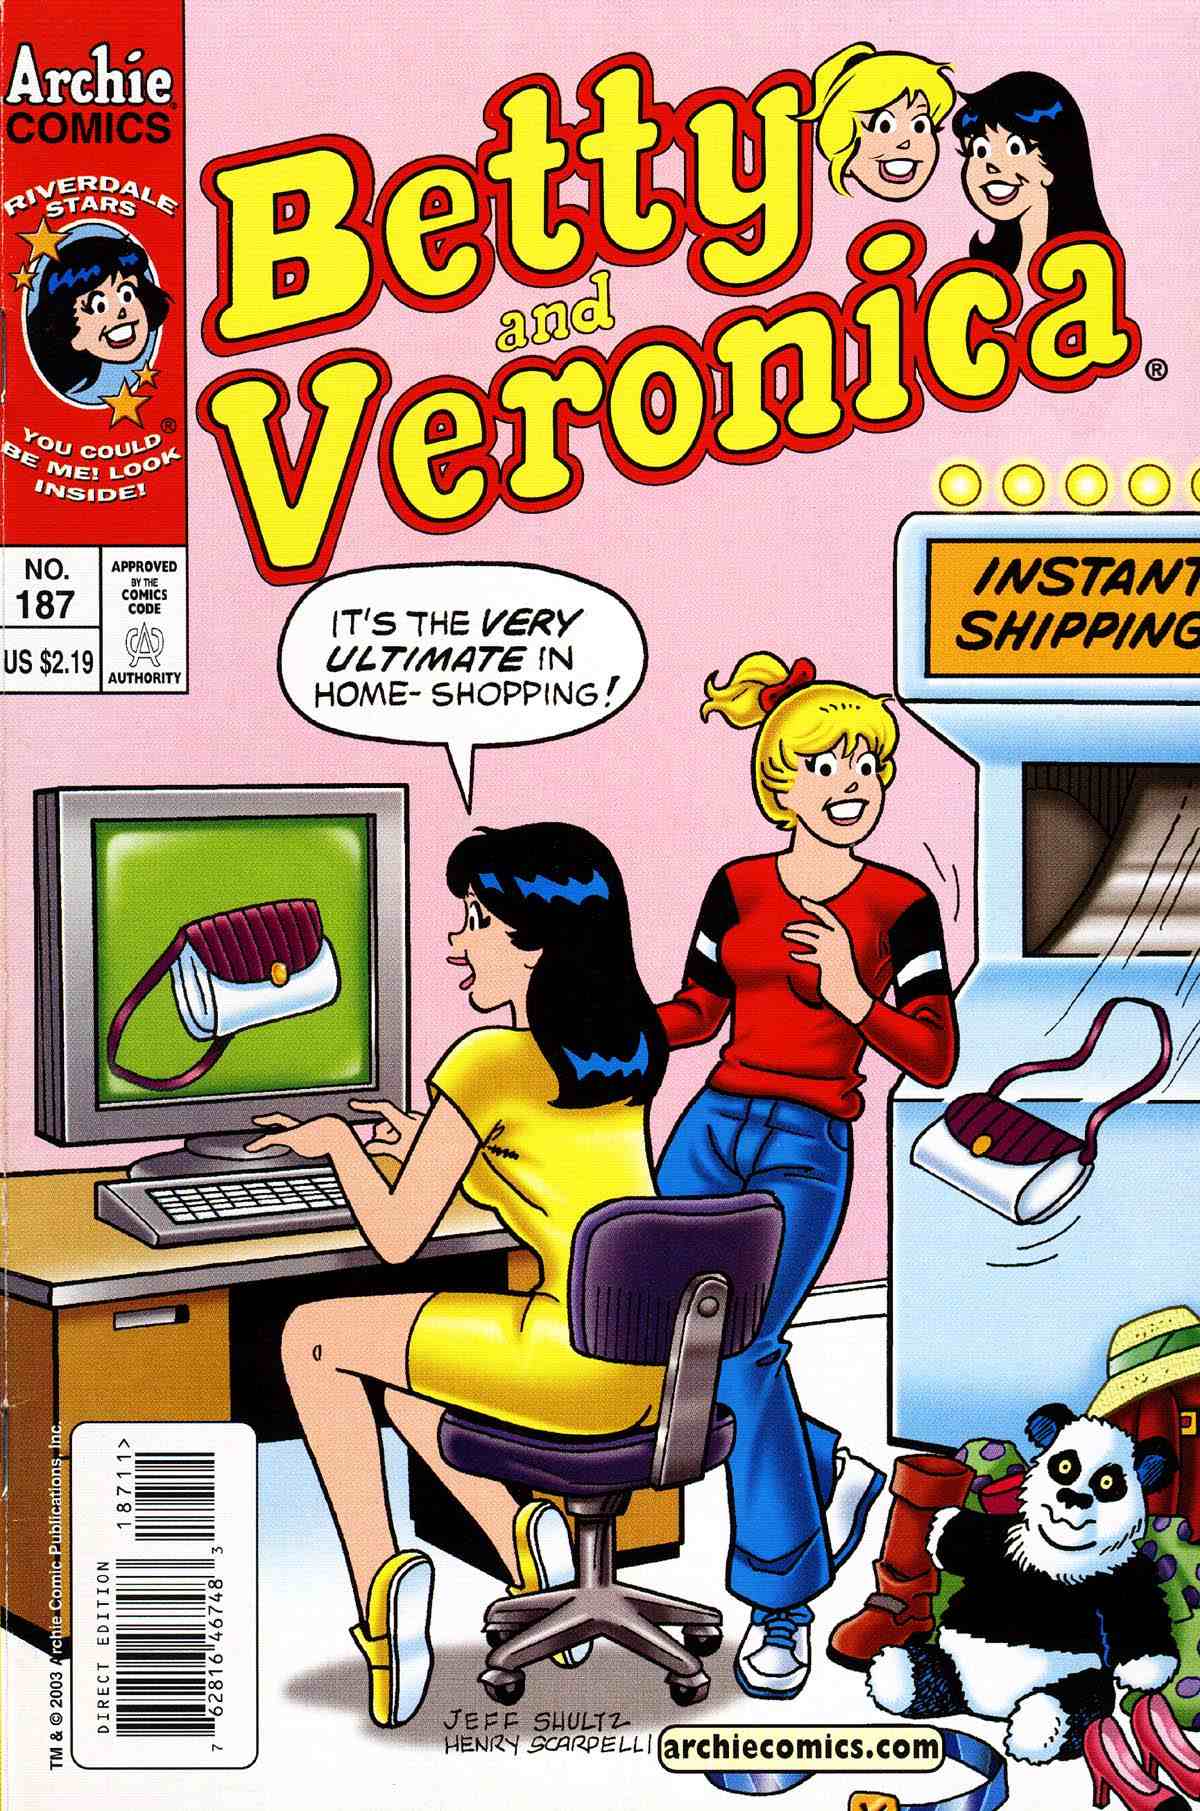 Read online Archie's Girls Betty and Veronica comic -  Issue #187 - 1